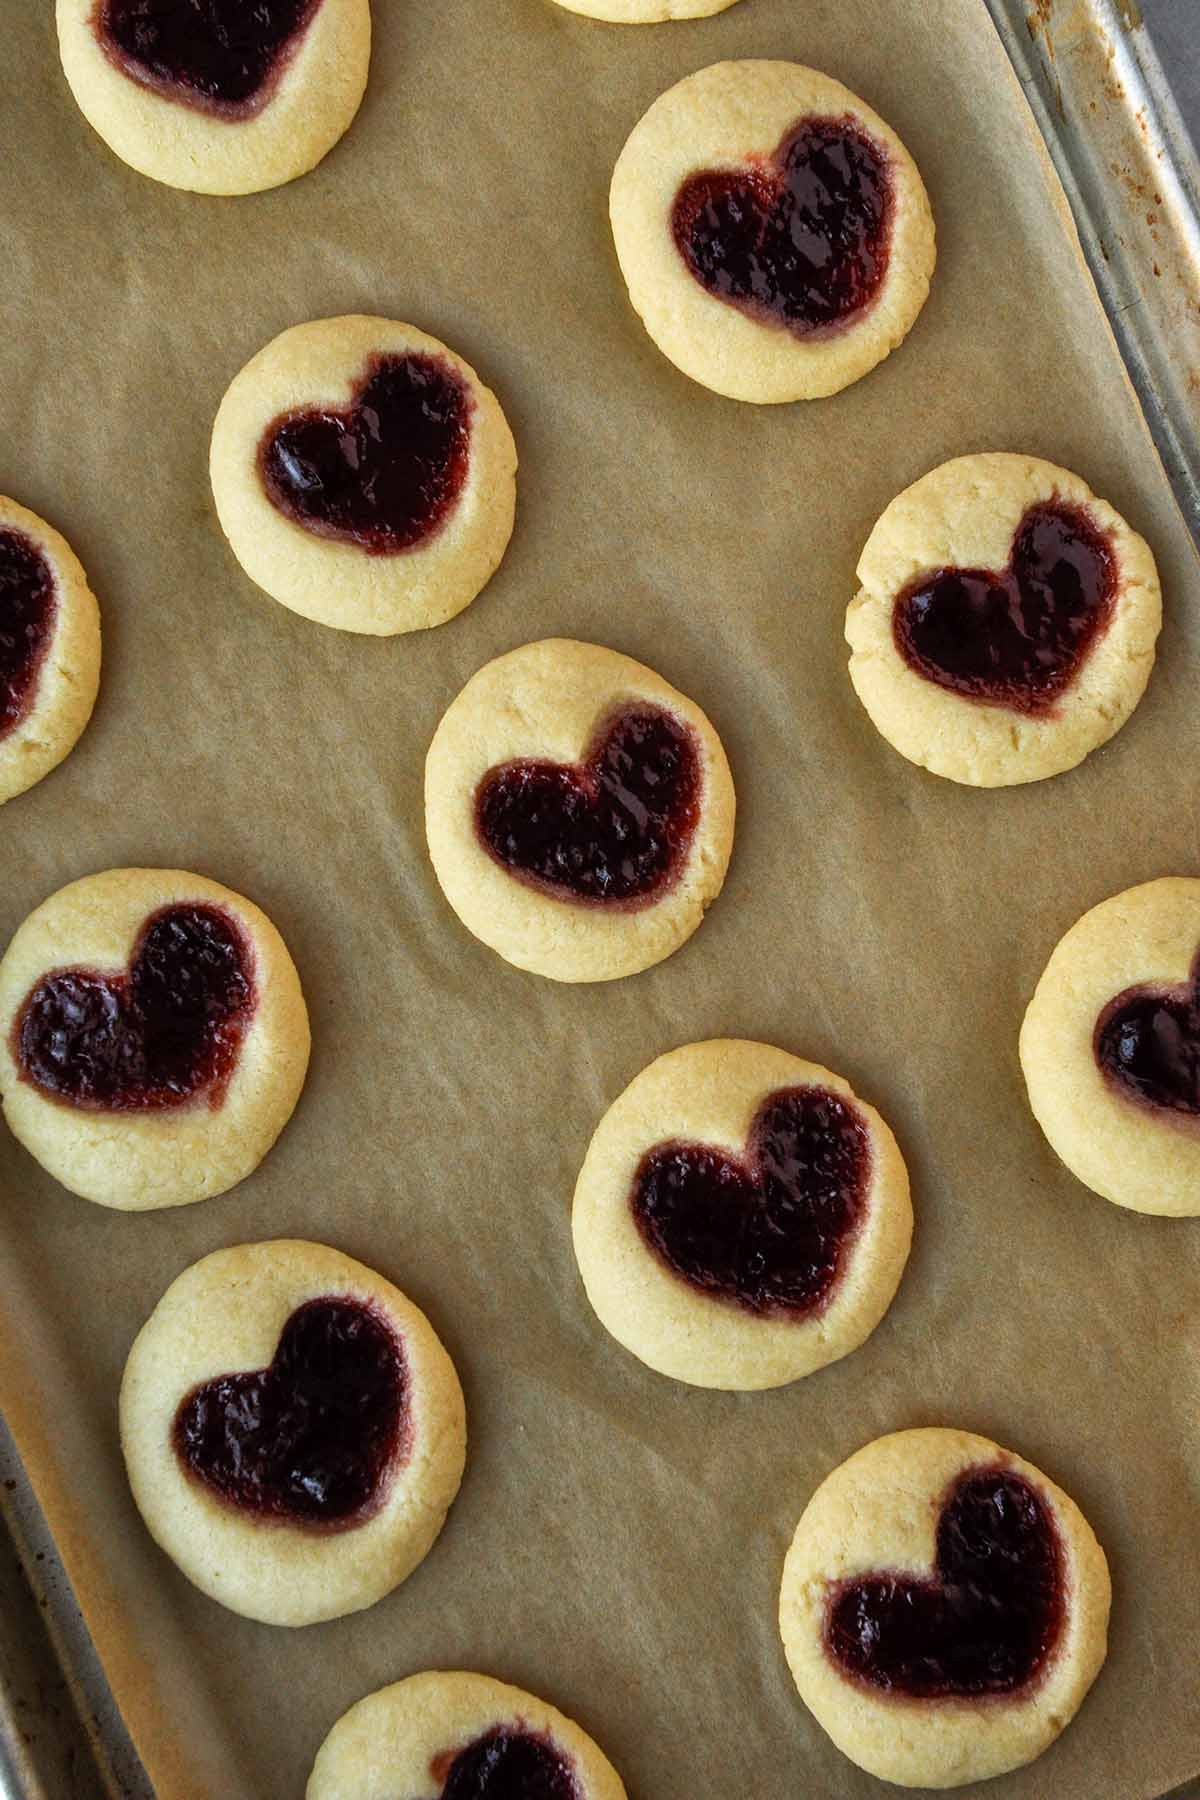 Thumbprint cookies on a baking tray.